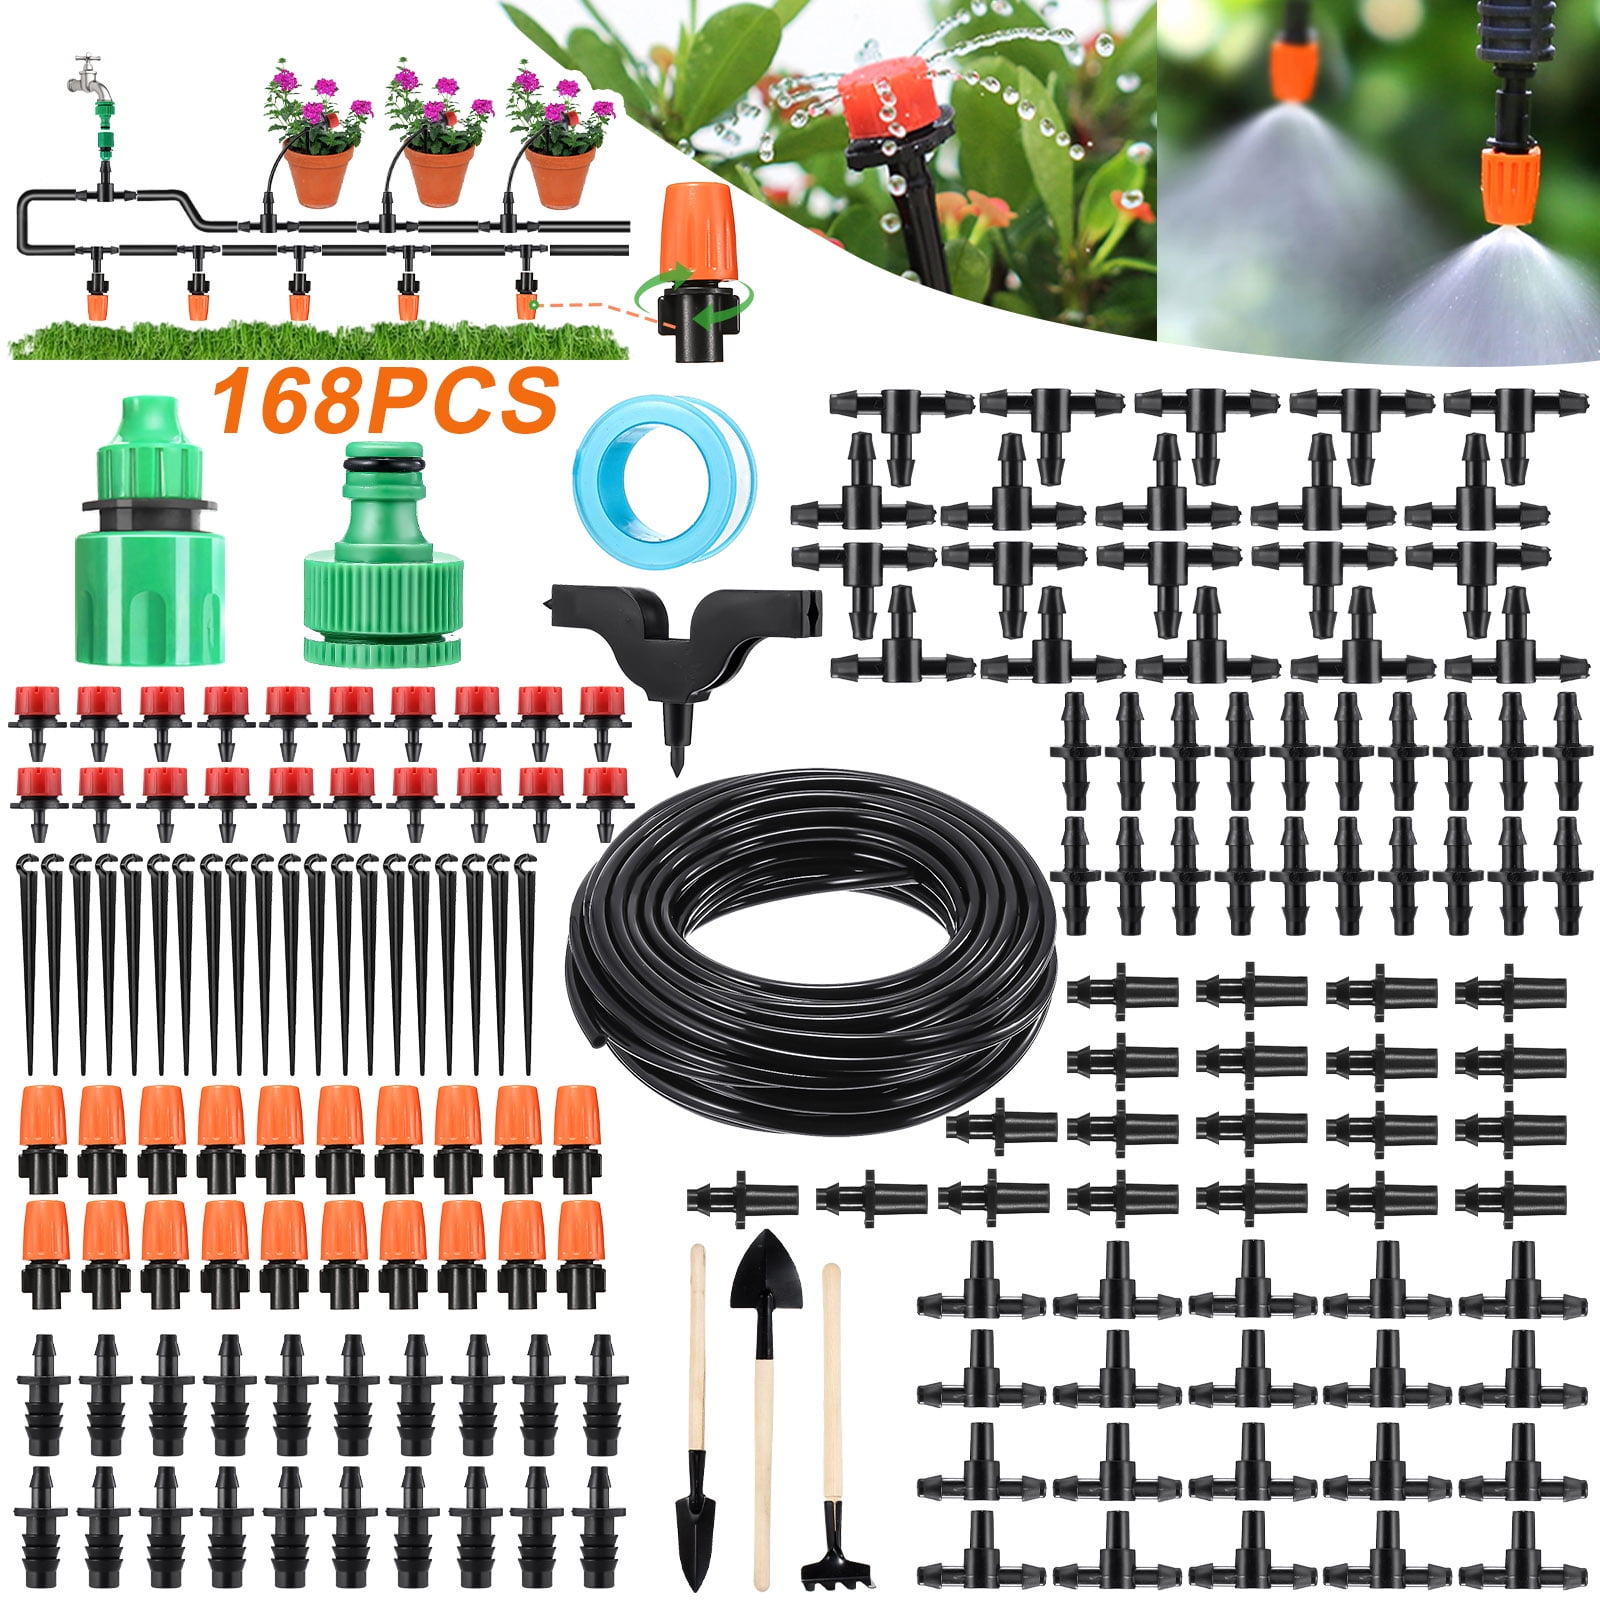 DIY Timer Drip Irrigation System Plant Lawn Watering Drip Irrigation Kit 82ft 1/4 Blank Distribution Tubing Watering Drip Kit for Greenhouse Cooling Suite Plant Watering 